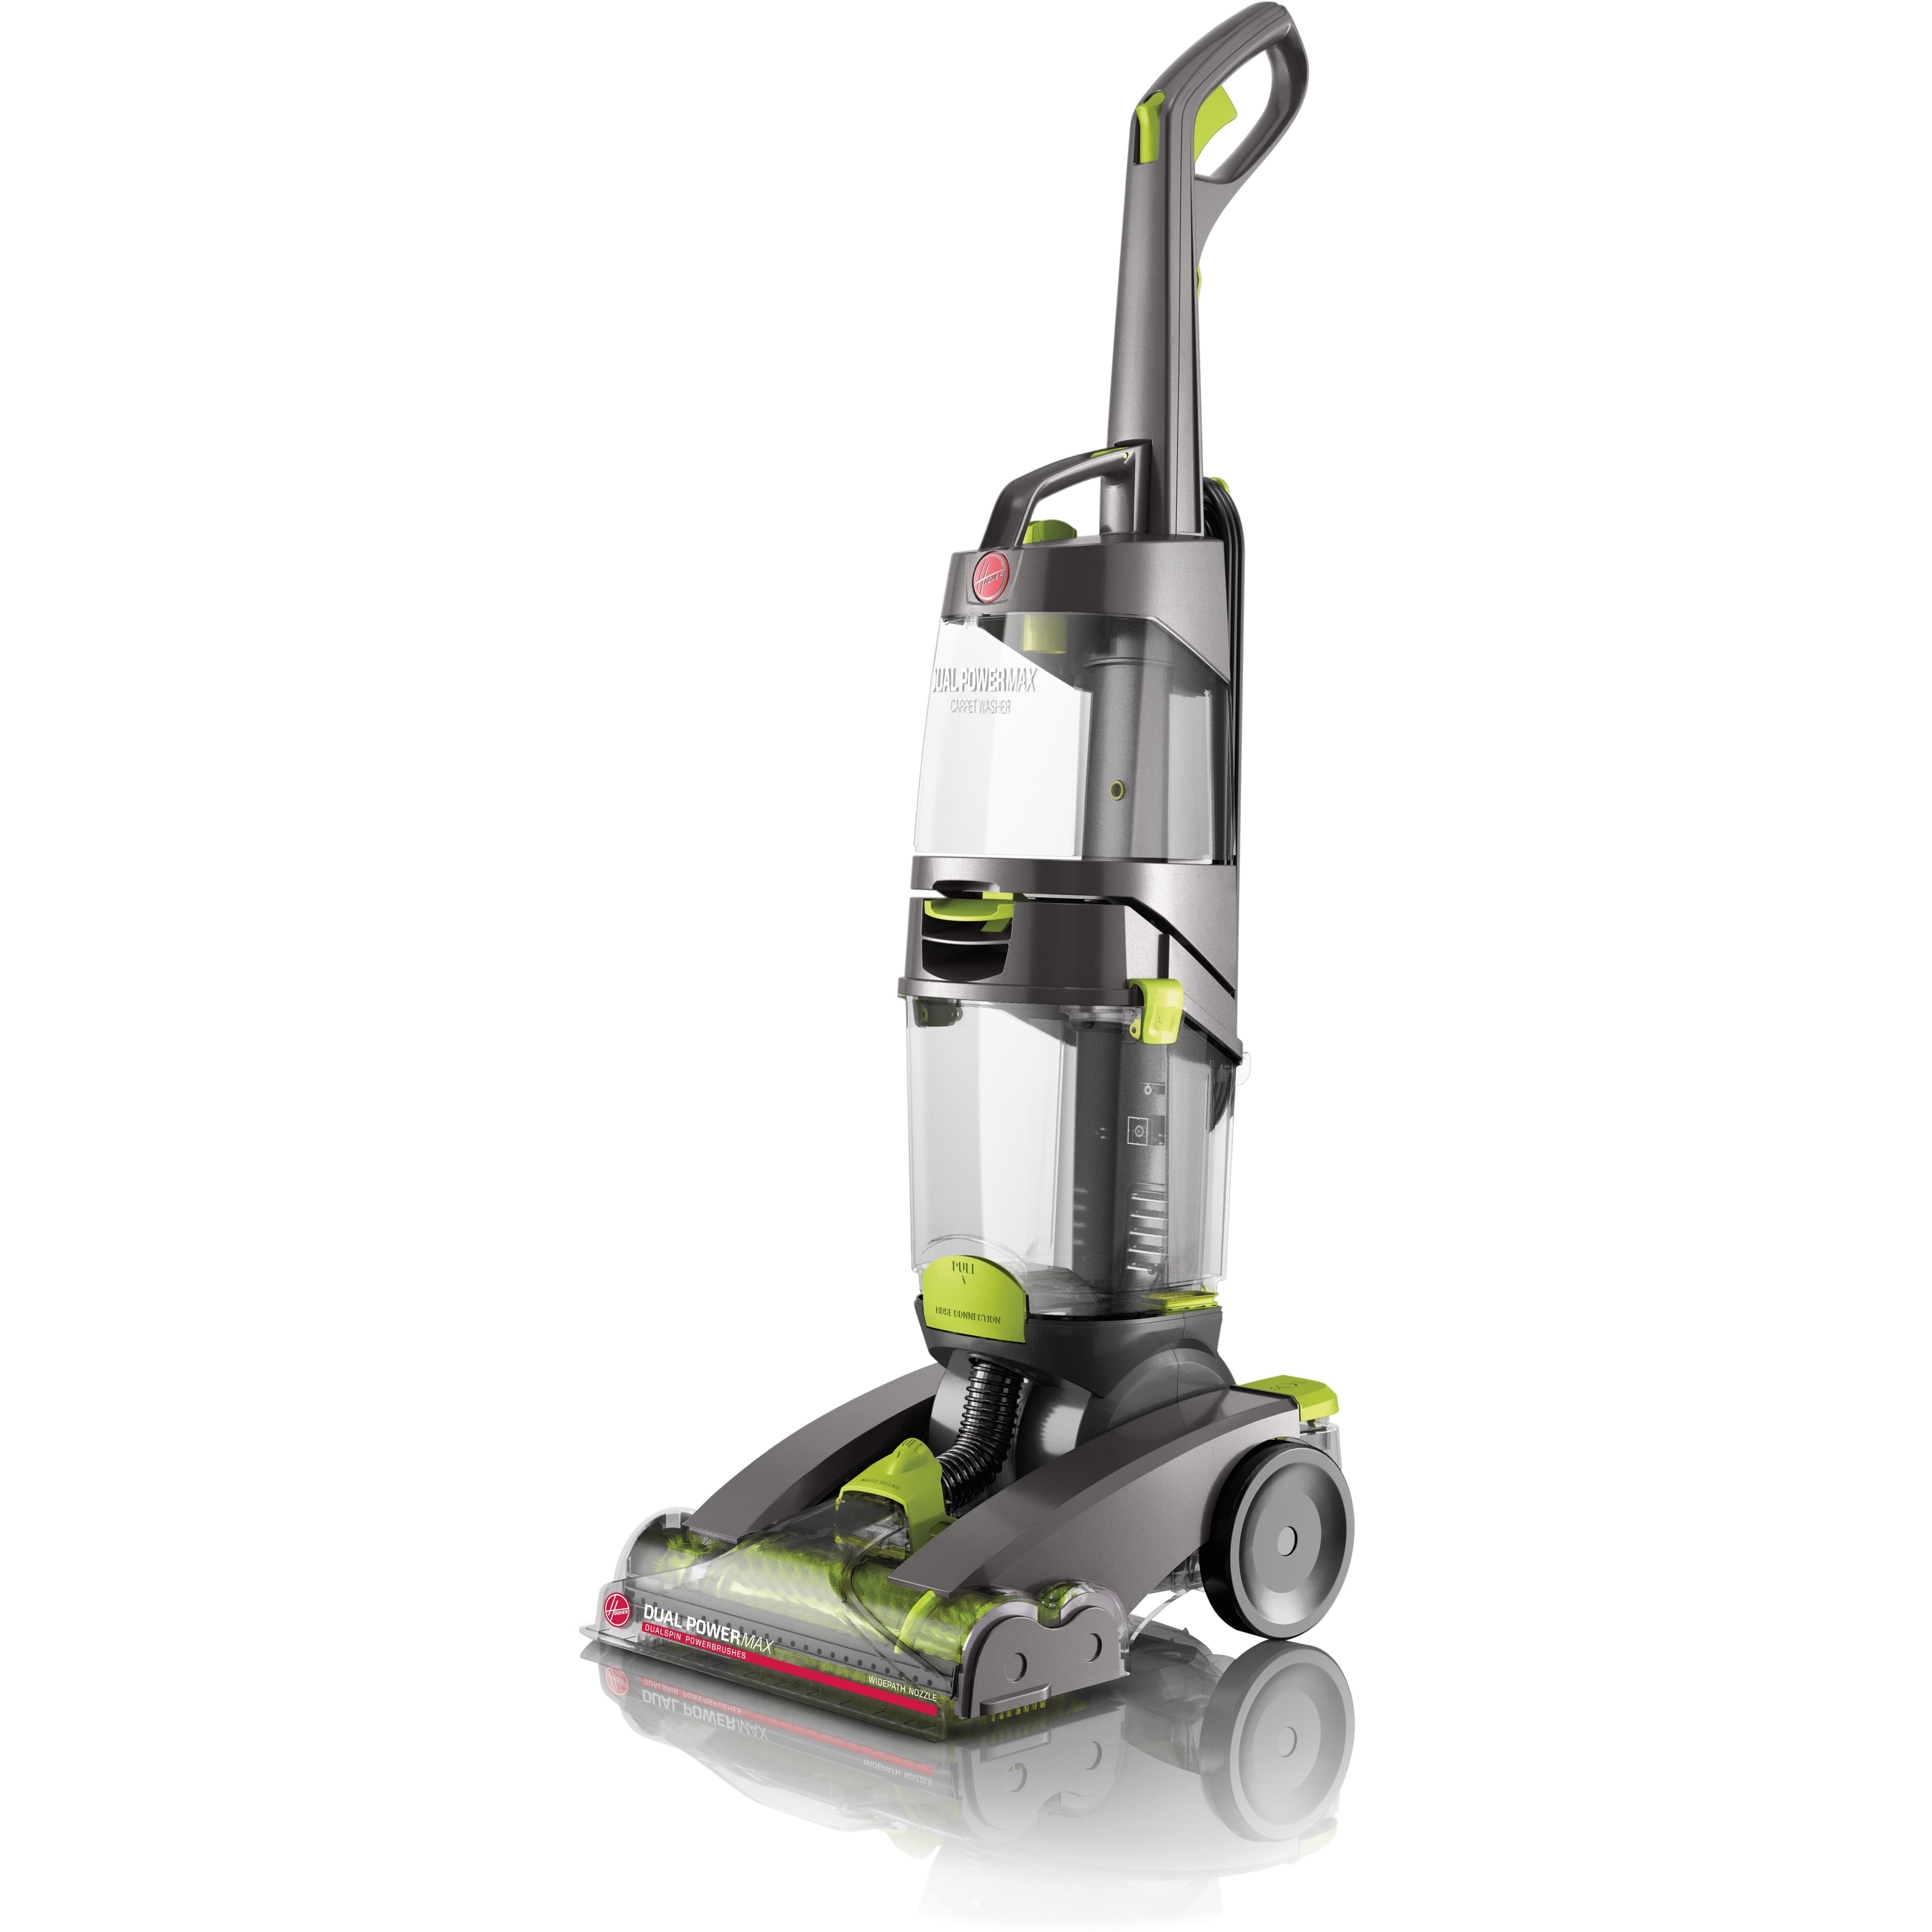 Hoover FH51000 Dual Power Max Upright Carpet Cleaner - image 1 of 5